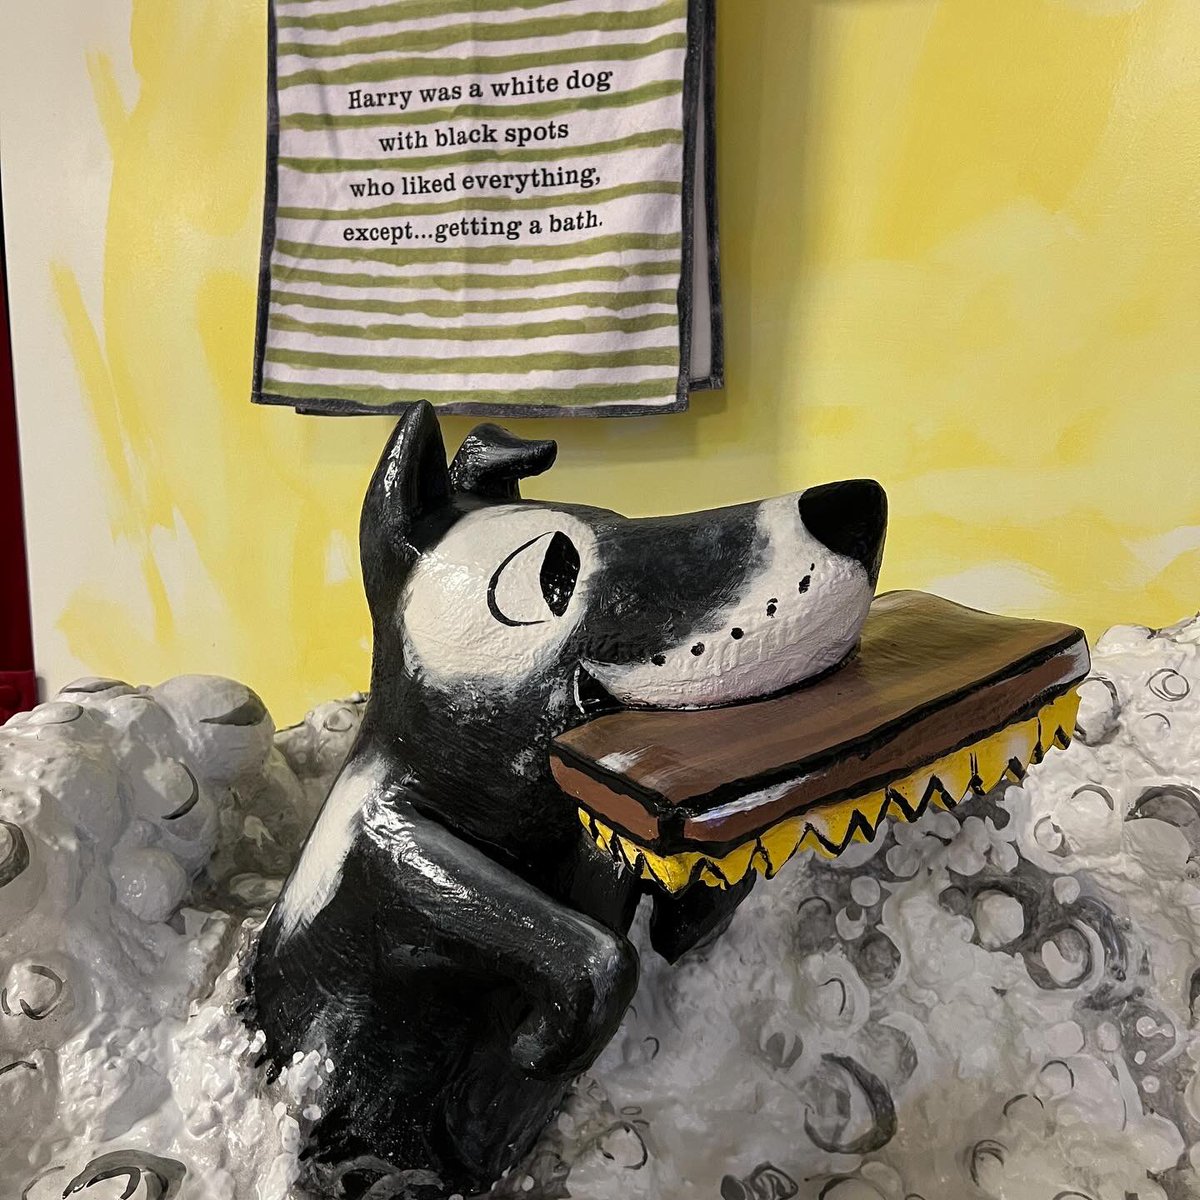 “It’s Harry! It’s Harry! It’s Harry!” they cried. This bathtub bench was one of the first sculptural pieces we built. Just like the pup in the book, this exhibit has been all over the place and got pretty dirty during our construction. Now we’re grateful he’s finally home. 1/2